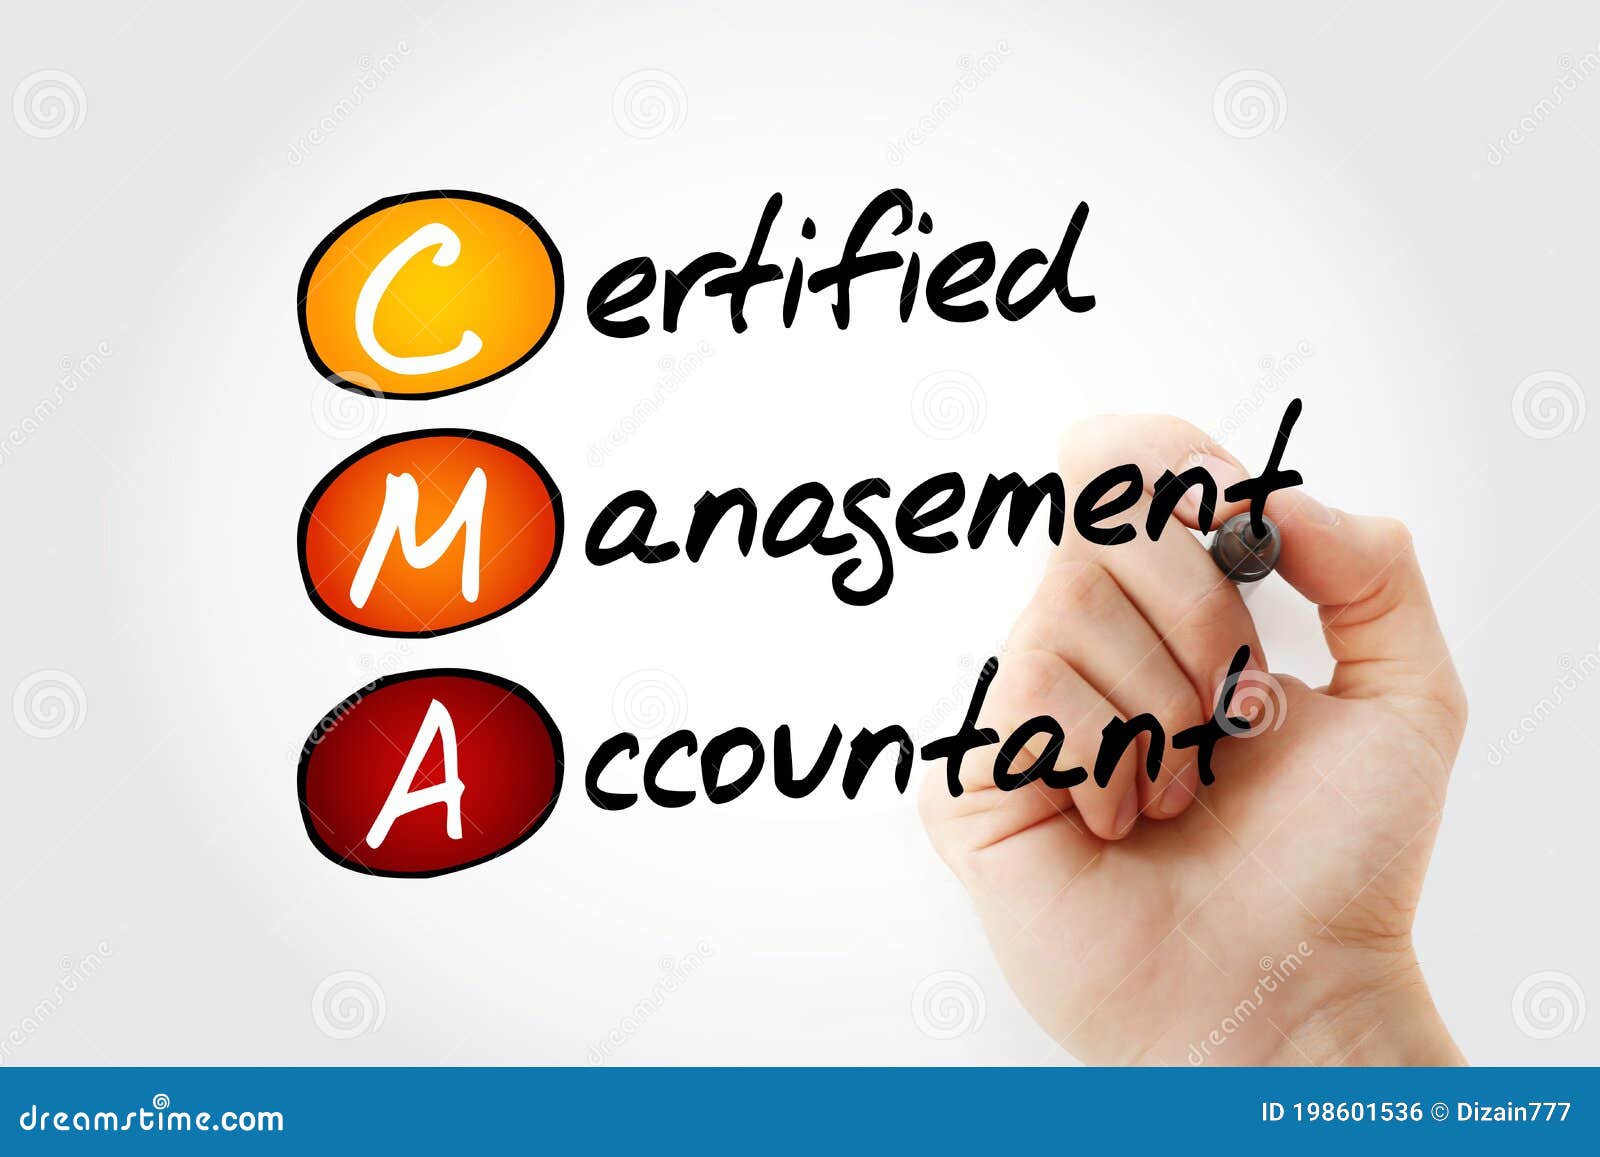 cma - certified management accountant acronym with marker, business concept background